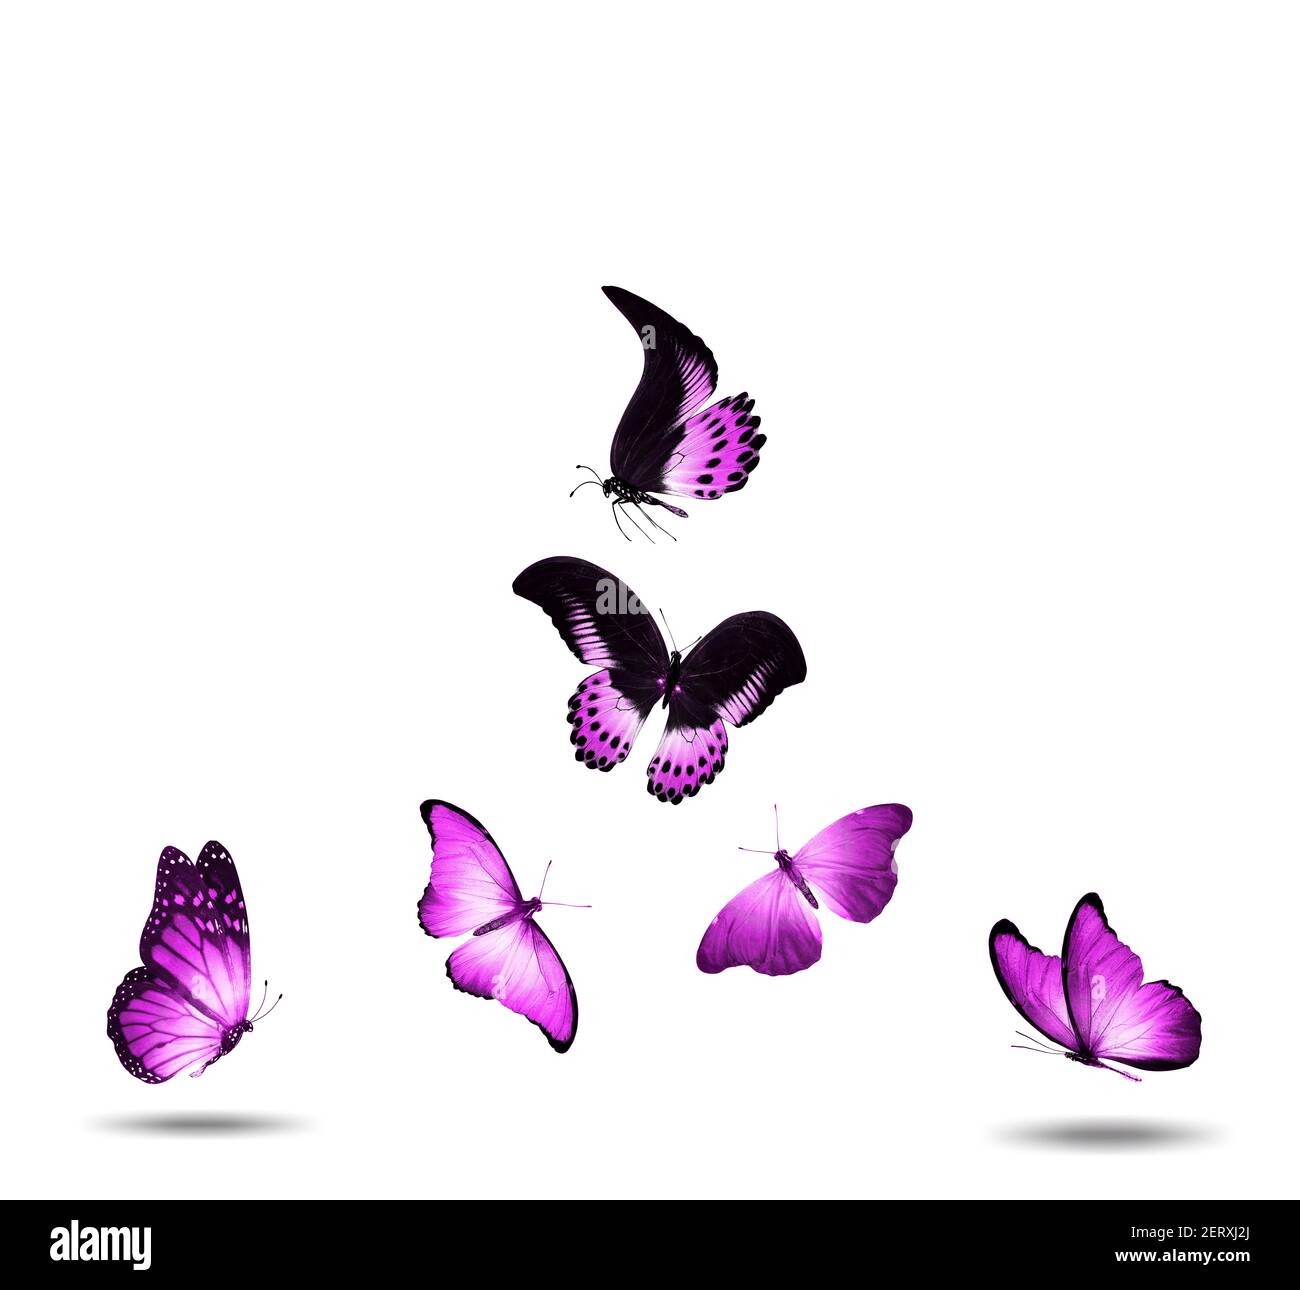 flock of pink butterflies isolated against a white background Stock Photo -  Alamy